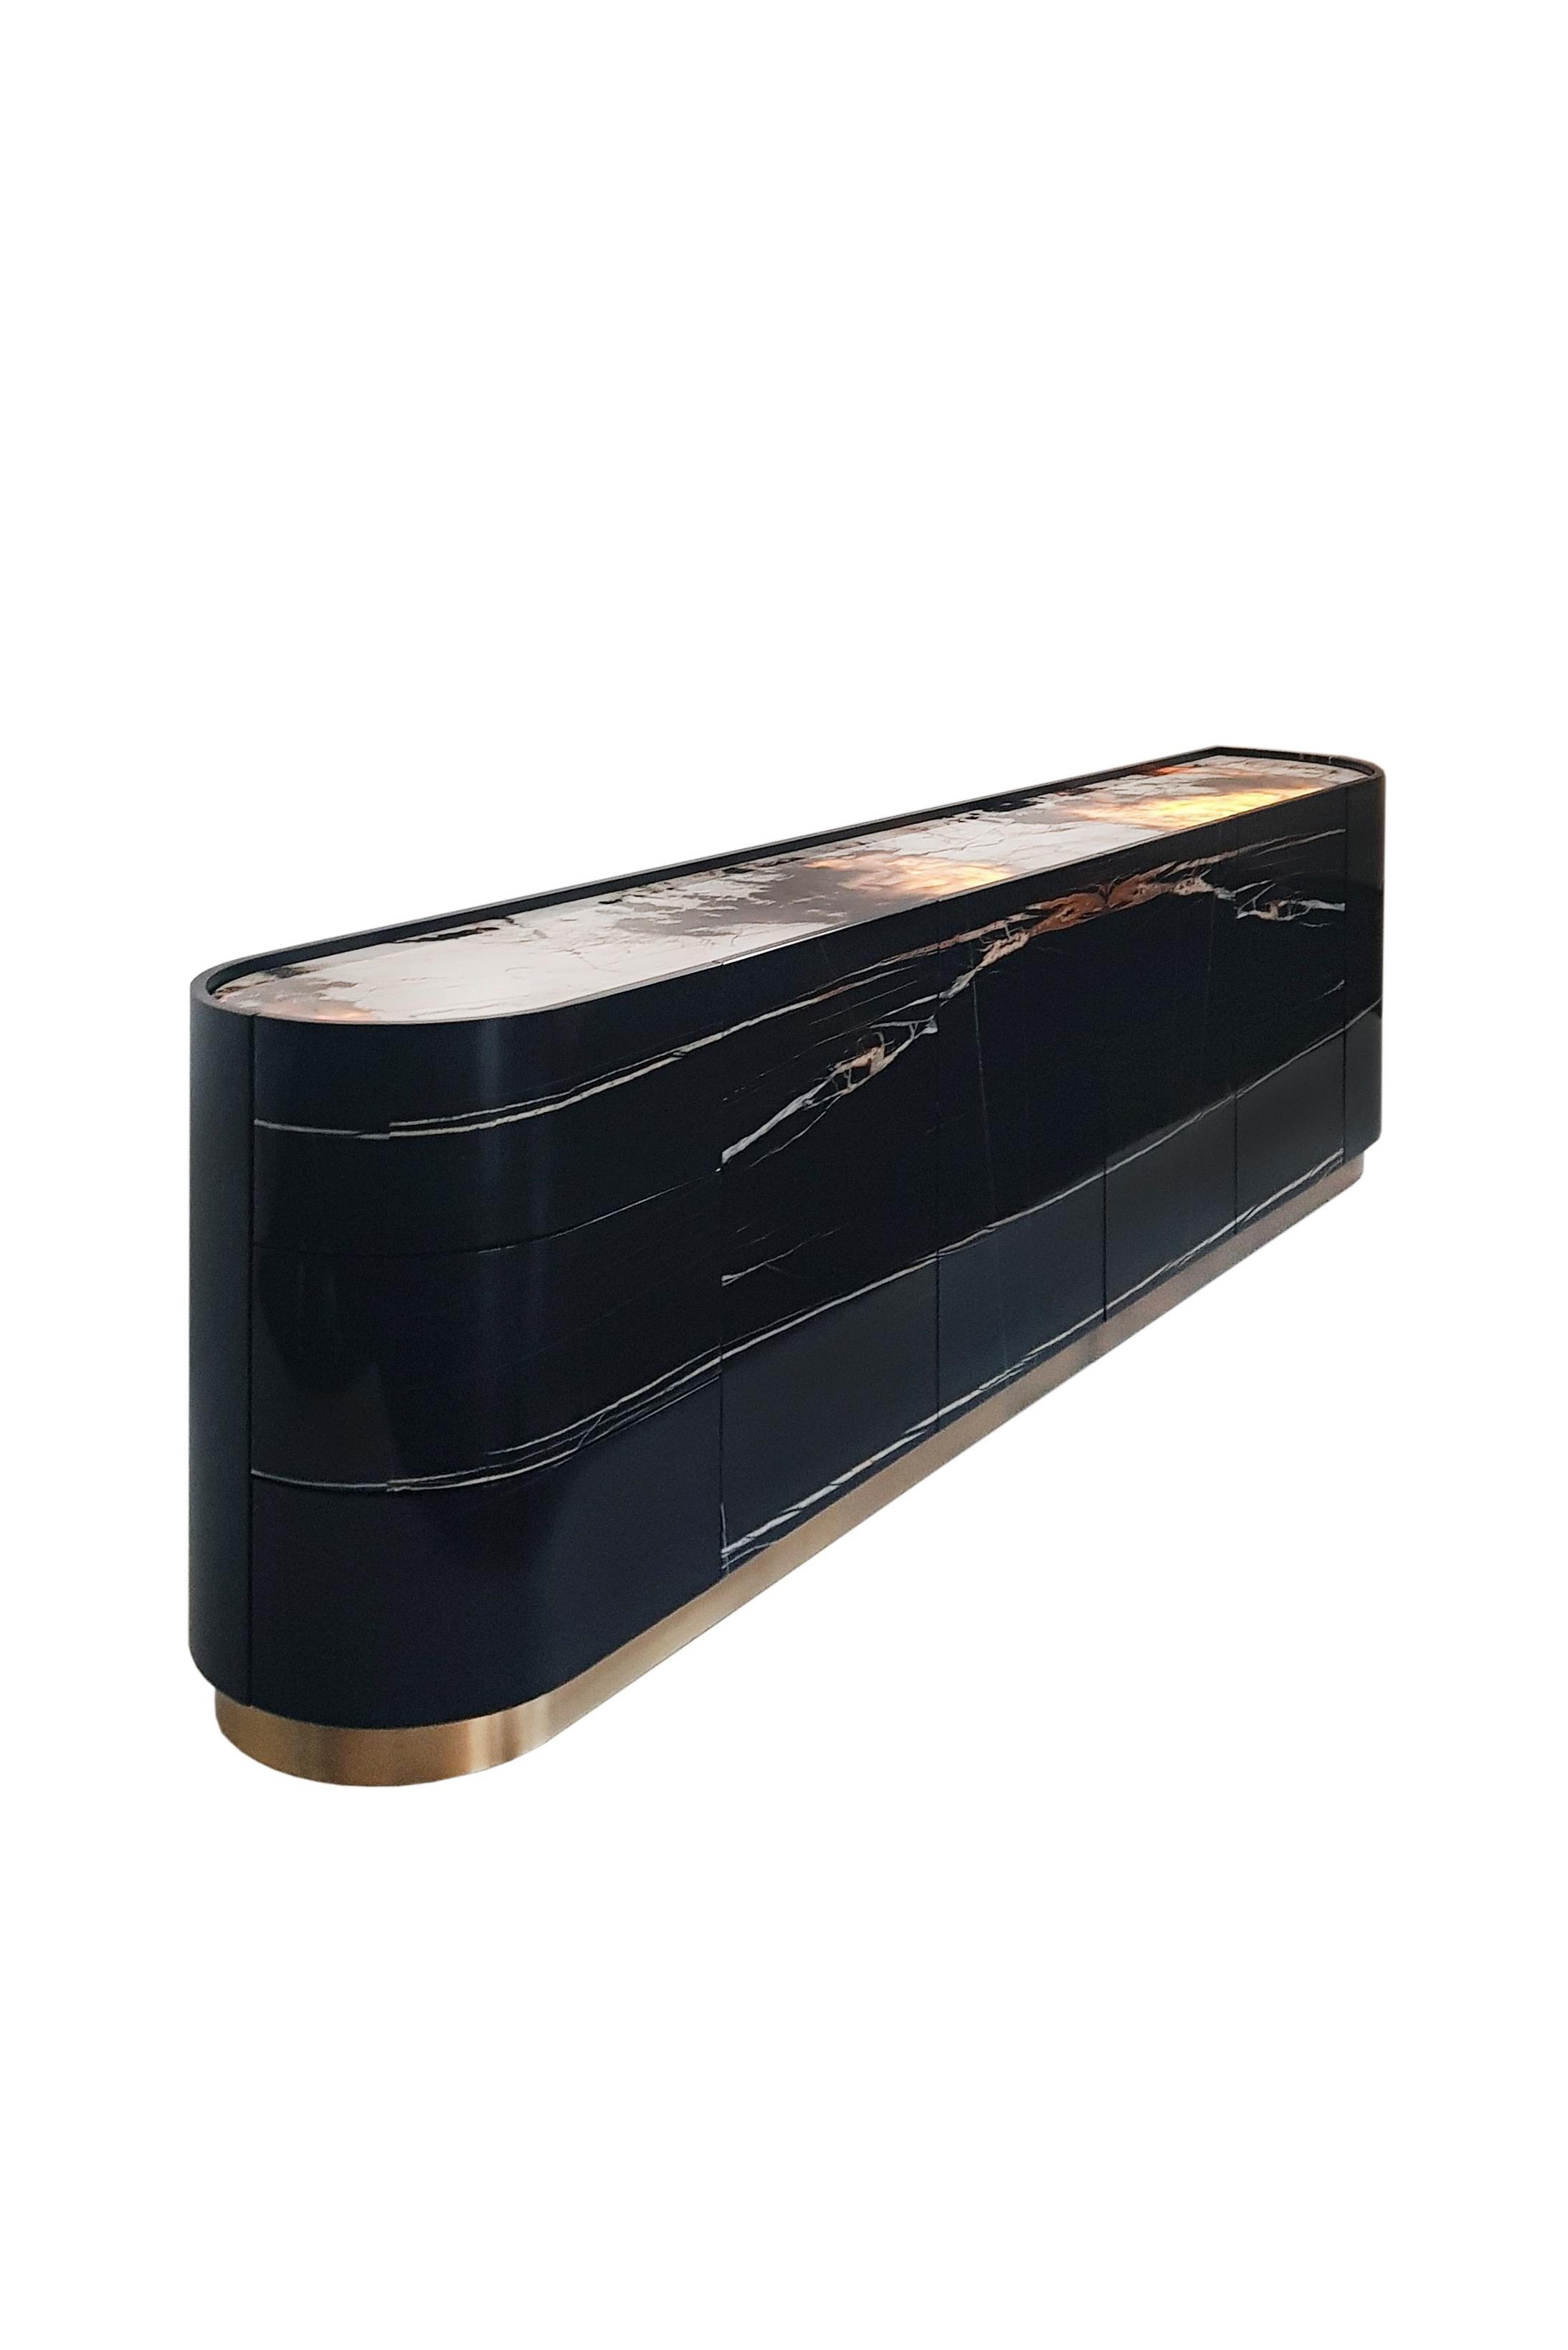 Hand-Crafted Modern Sahara Cocktail Cabinet, Noir Marble, Handmade in Portugal by Greenapple For Sale